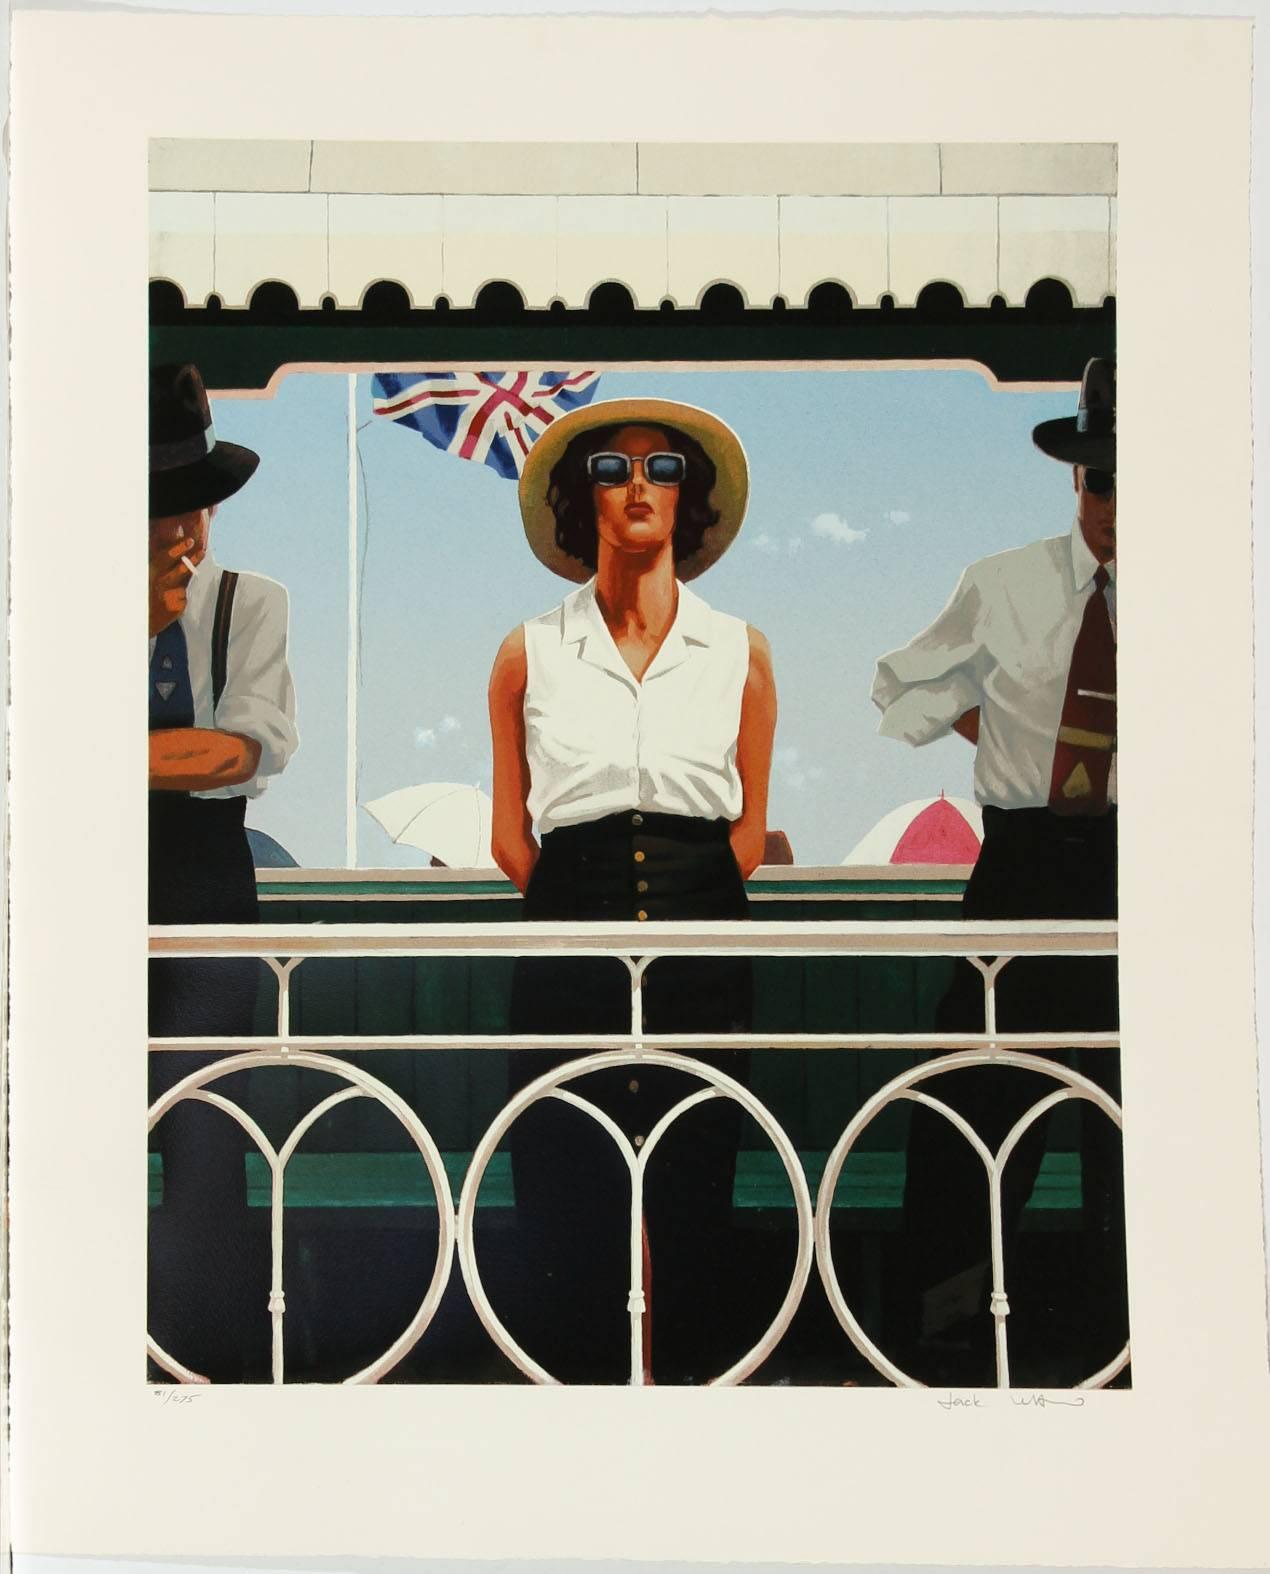 Jack Vettriano Limited Edition Signed Print no. 81/275, numbered and signed in pencil to margin. Published 2003. Printed on wove paper. The image size is 72.5 x 57 cm; Total sheet size is 89 x 72 cm.
